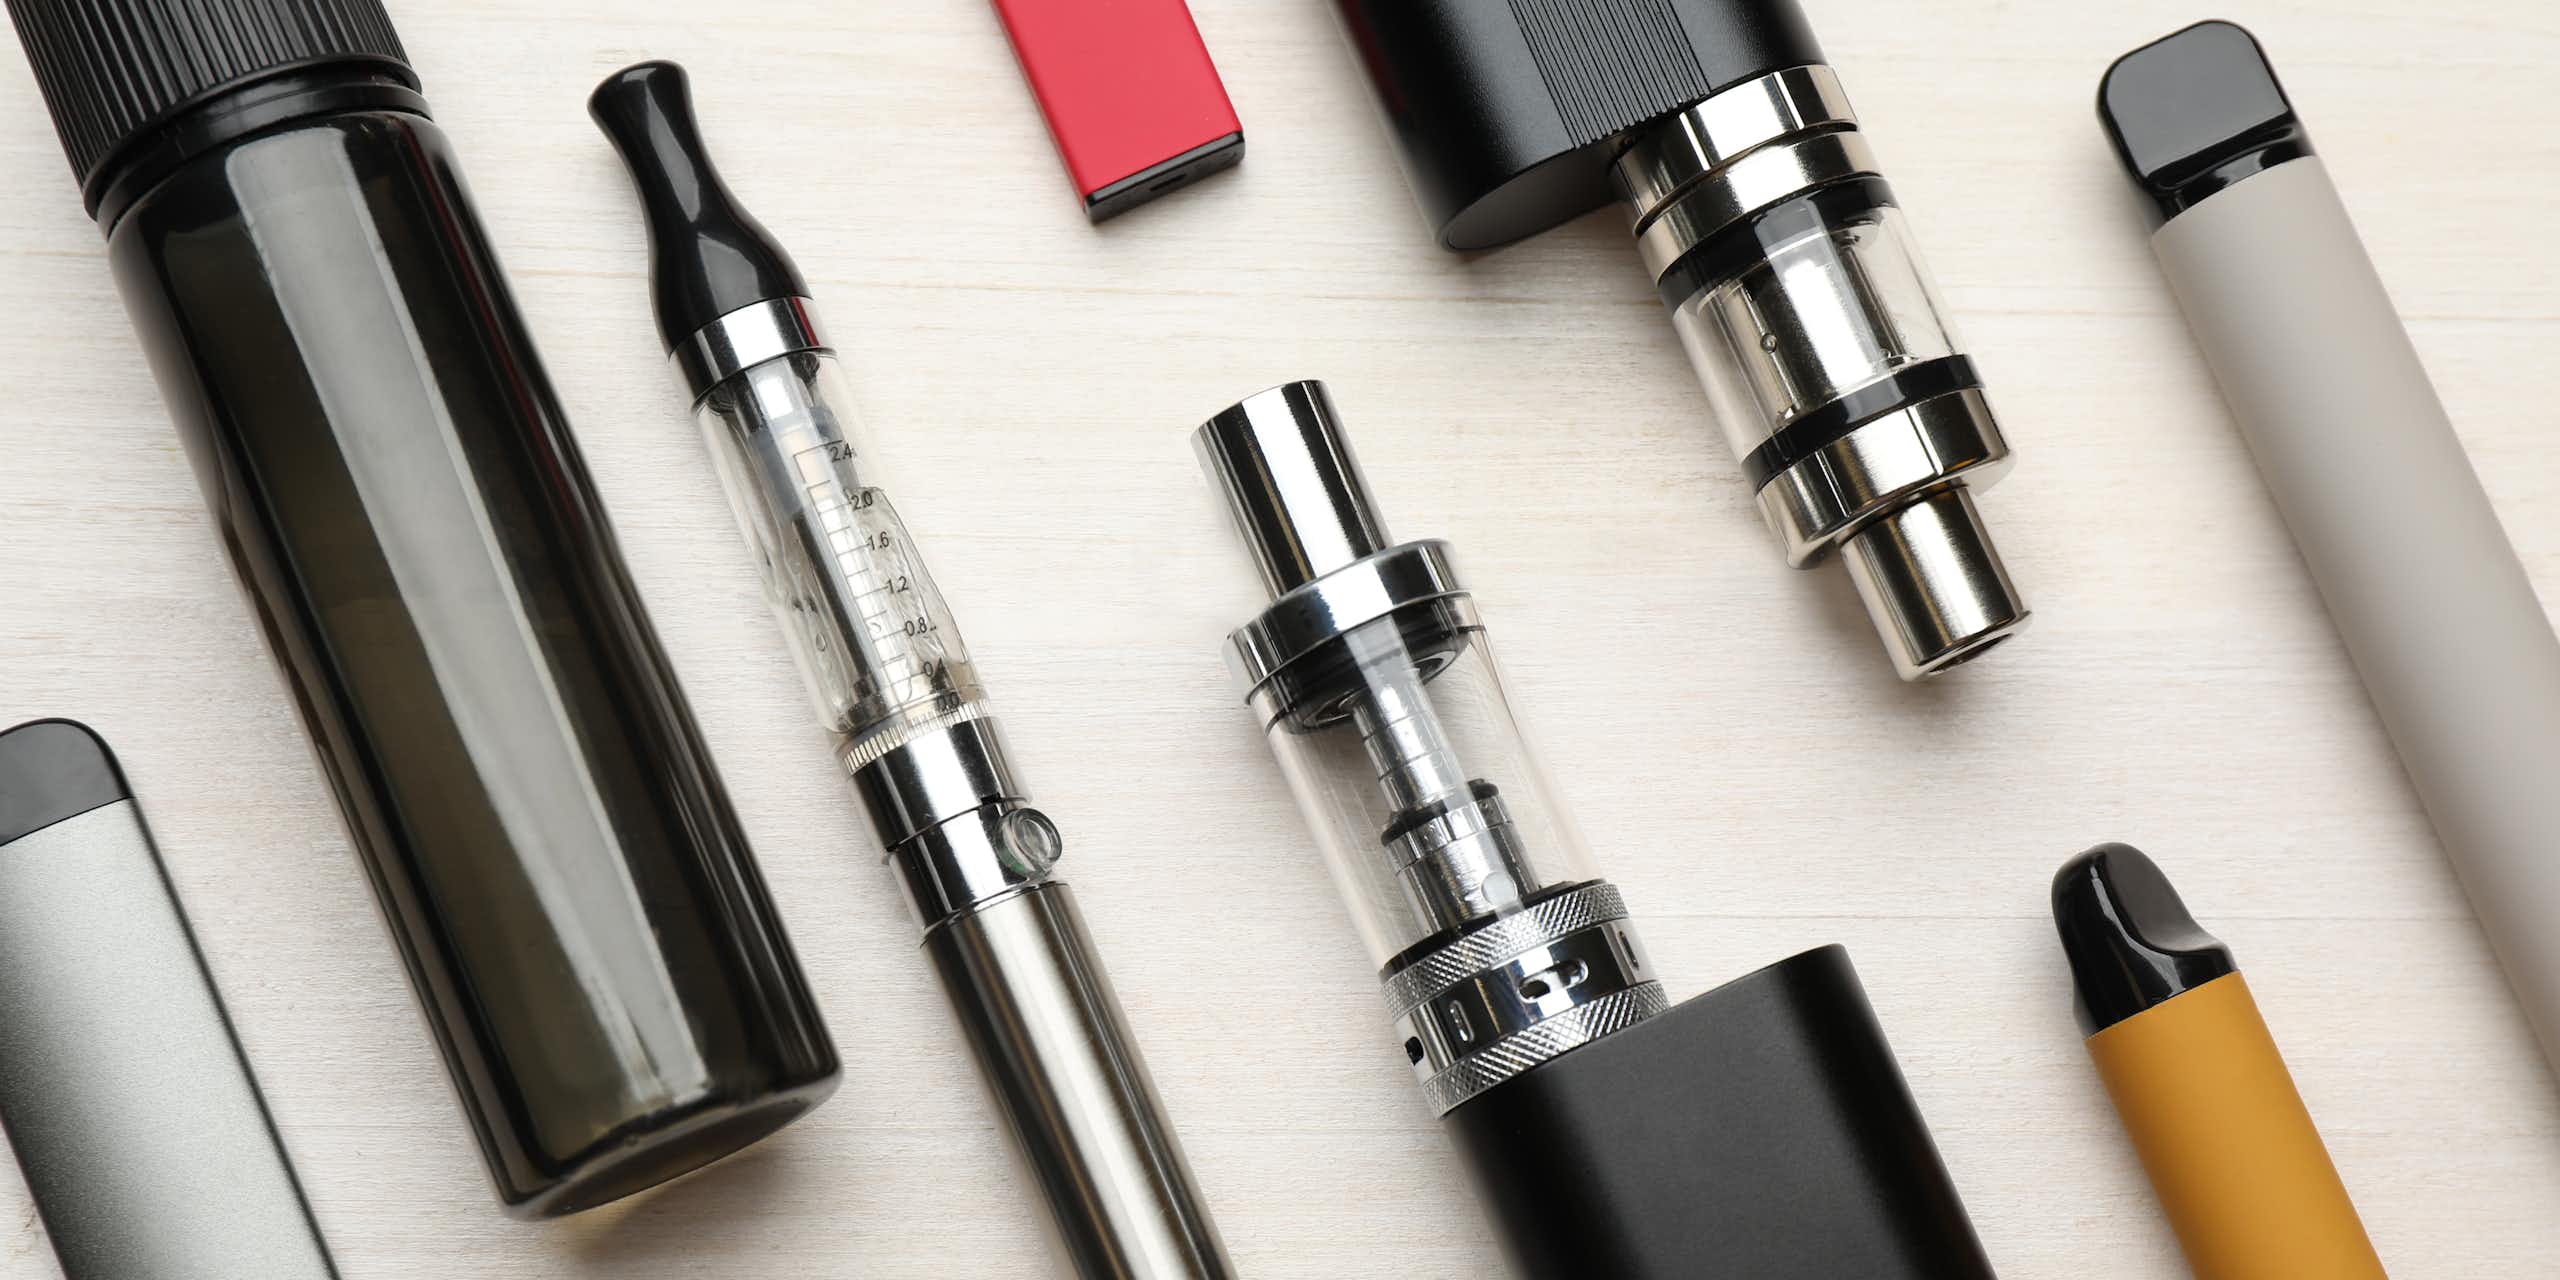 A variety of e-cigarette products lying flat on a white surface.